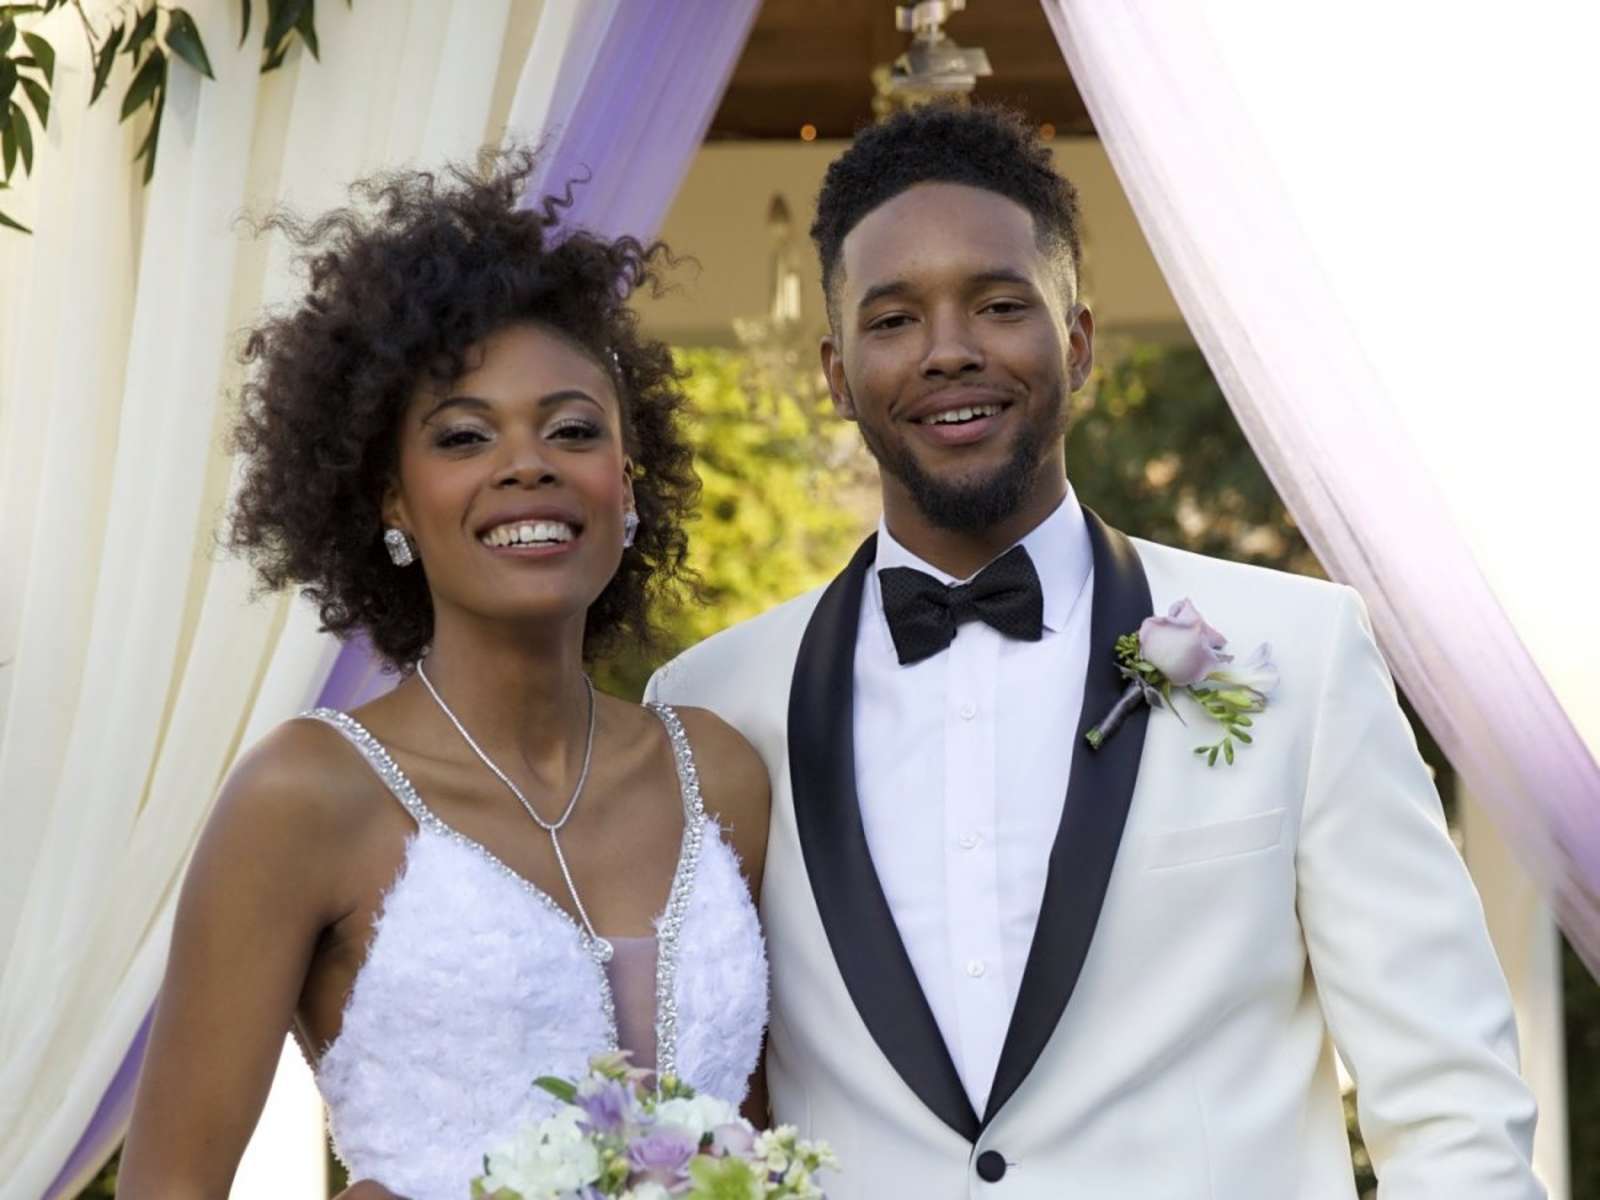 Married at First Sight recap Keith Manley marries Iris Caldwell and discovers shes a virgin, Elizabeth Bice weds Jamie Thompson